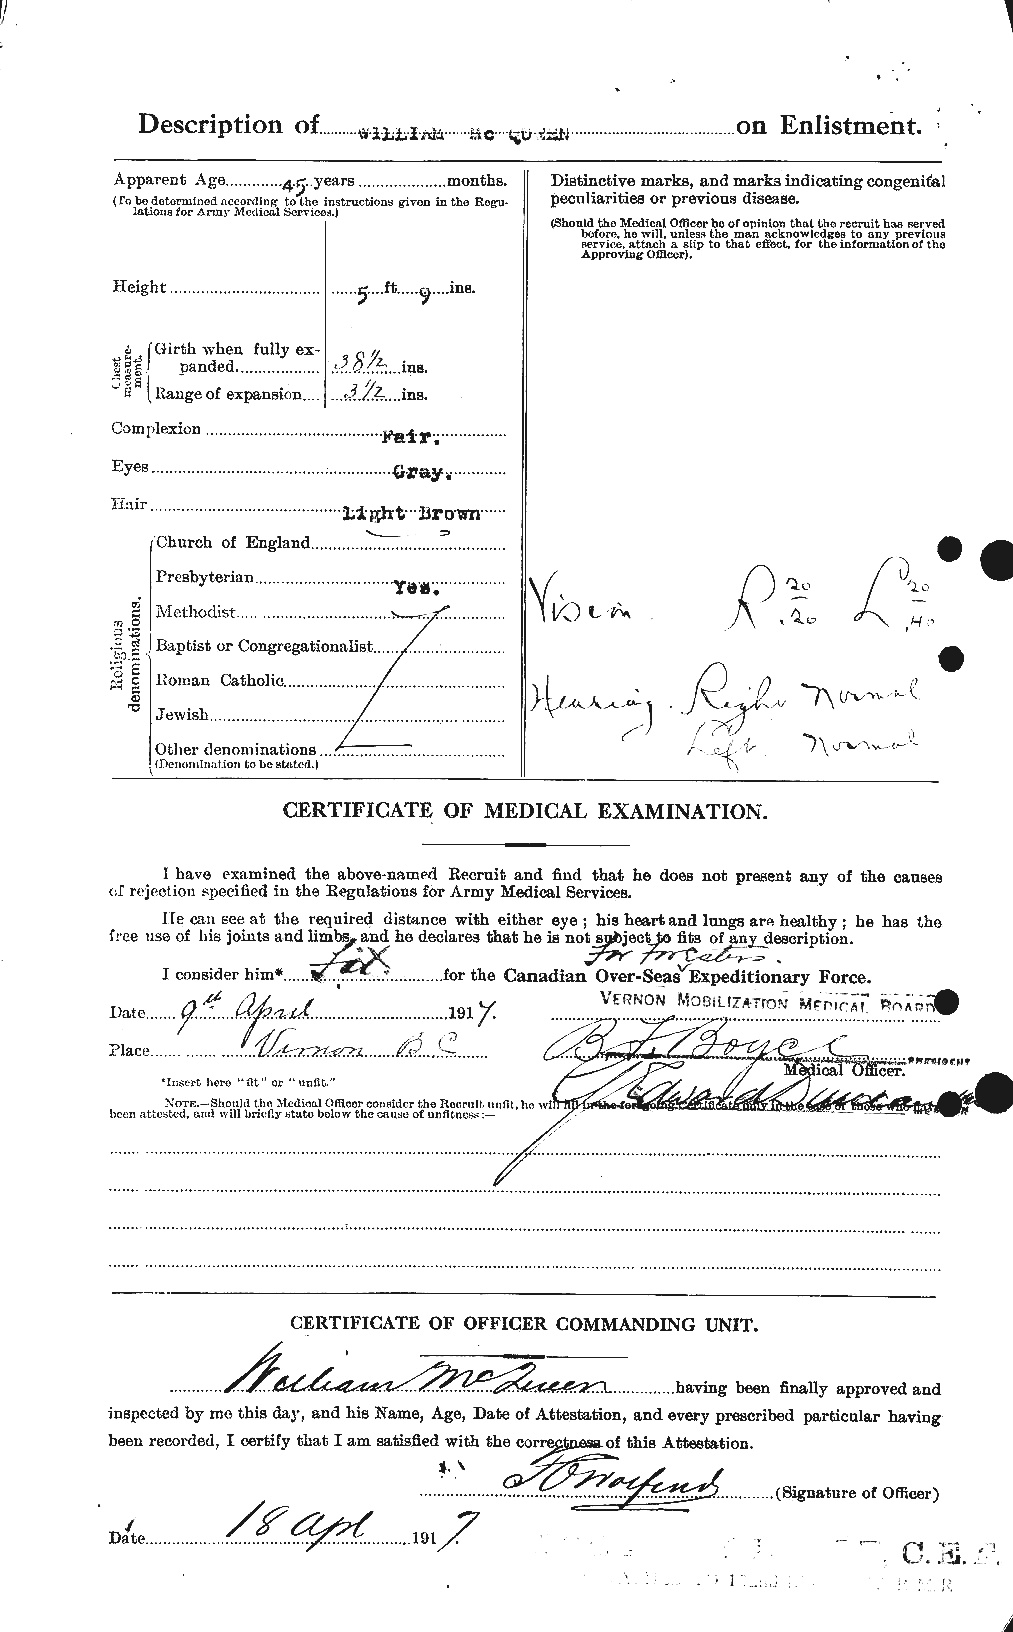 Personnel Records of the First World War - CEF 545992b